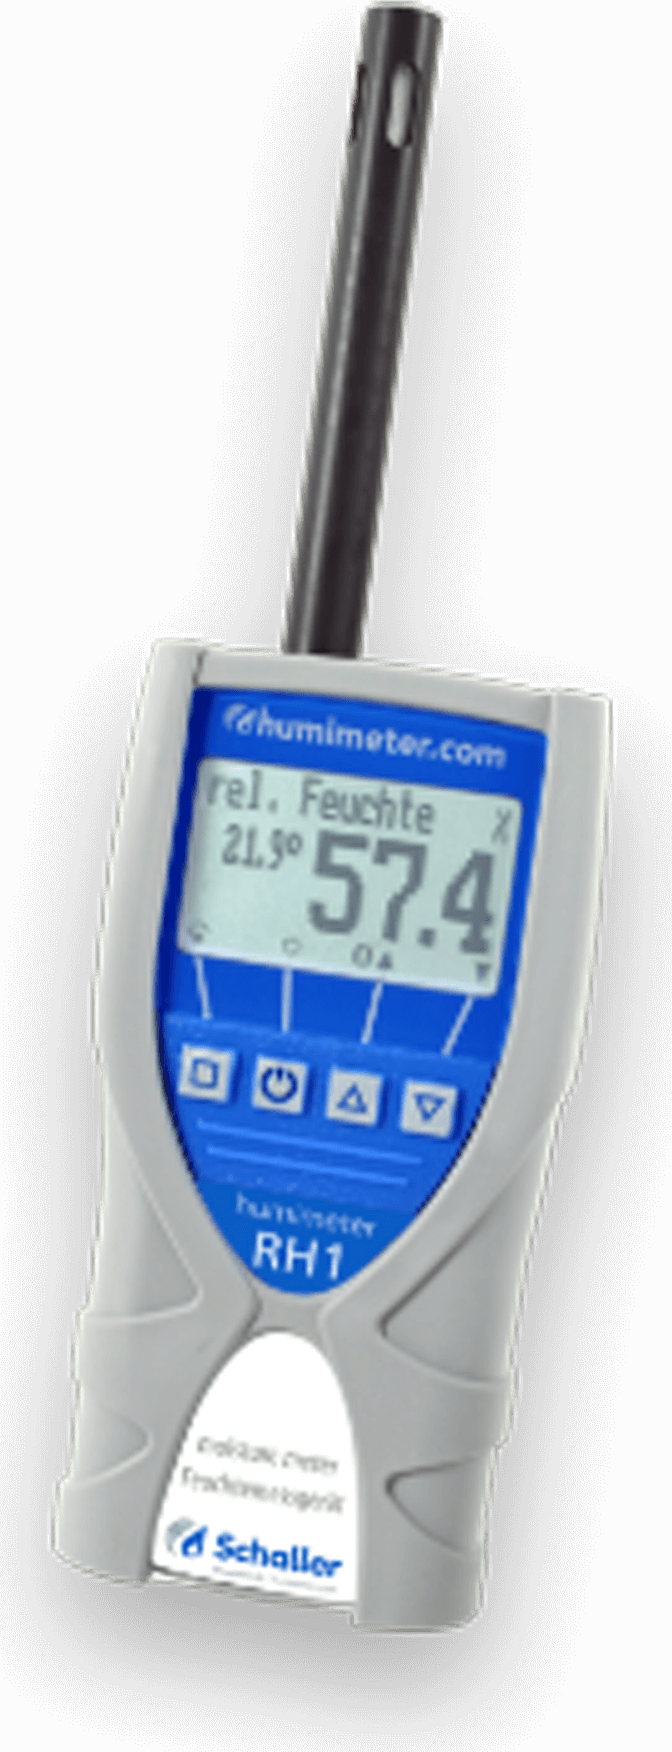 humimeter RH1 Humidity meter for measuring the relative humidity - with rubber protection